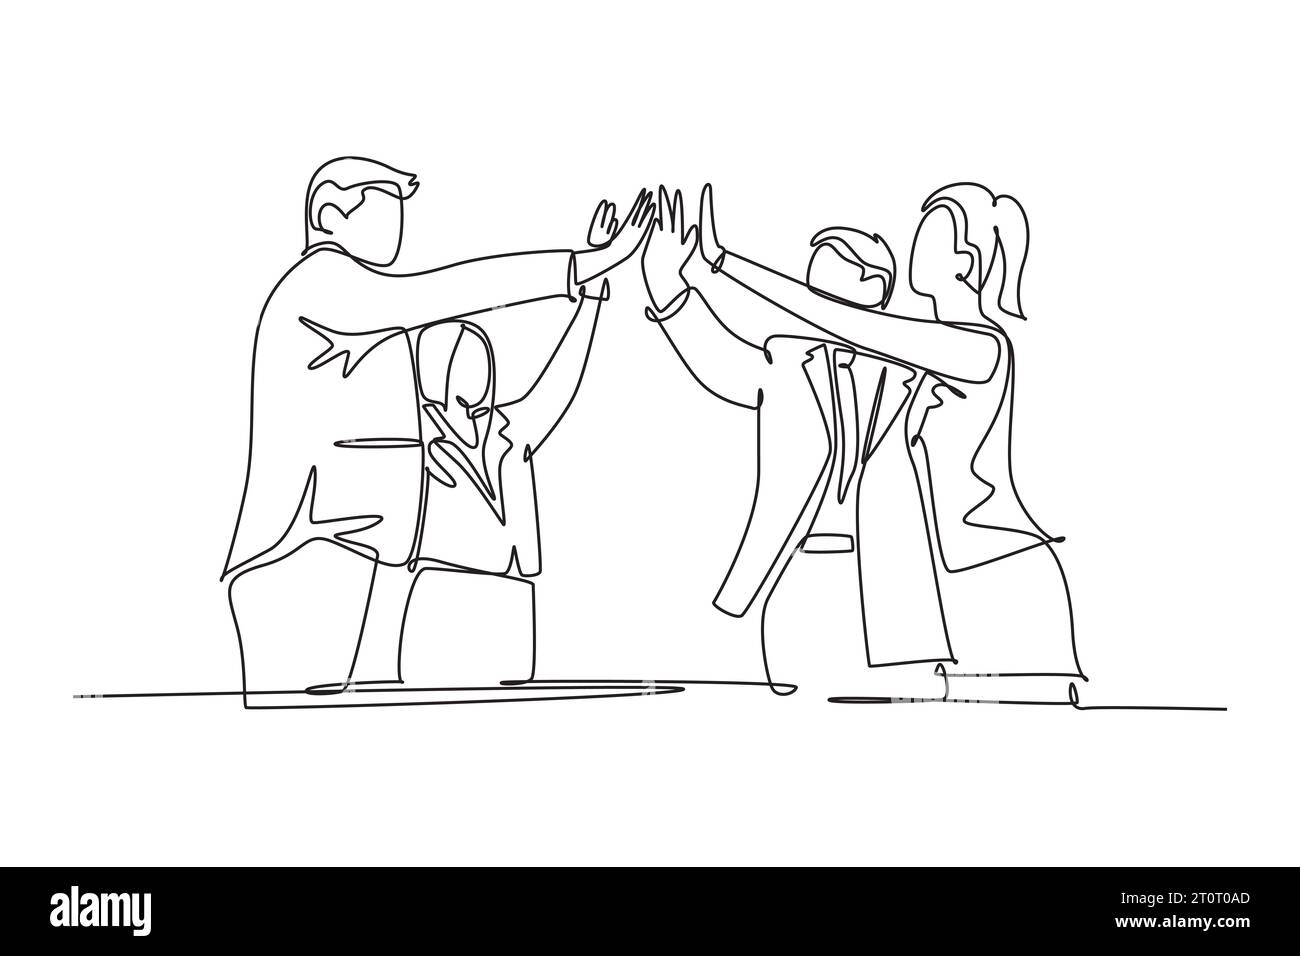 Single continuous line drawing of businessmen and businesswomen celebrating their successive goal at business meeting with high five gesture. Business Stock Photo